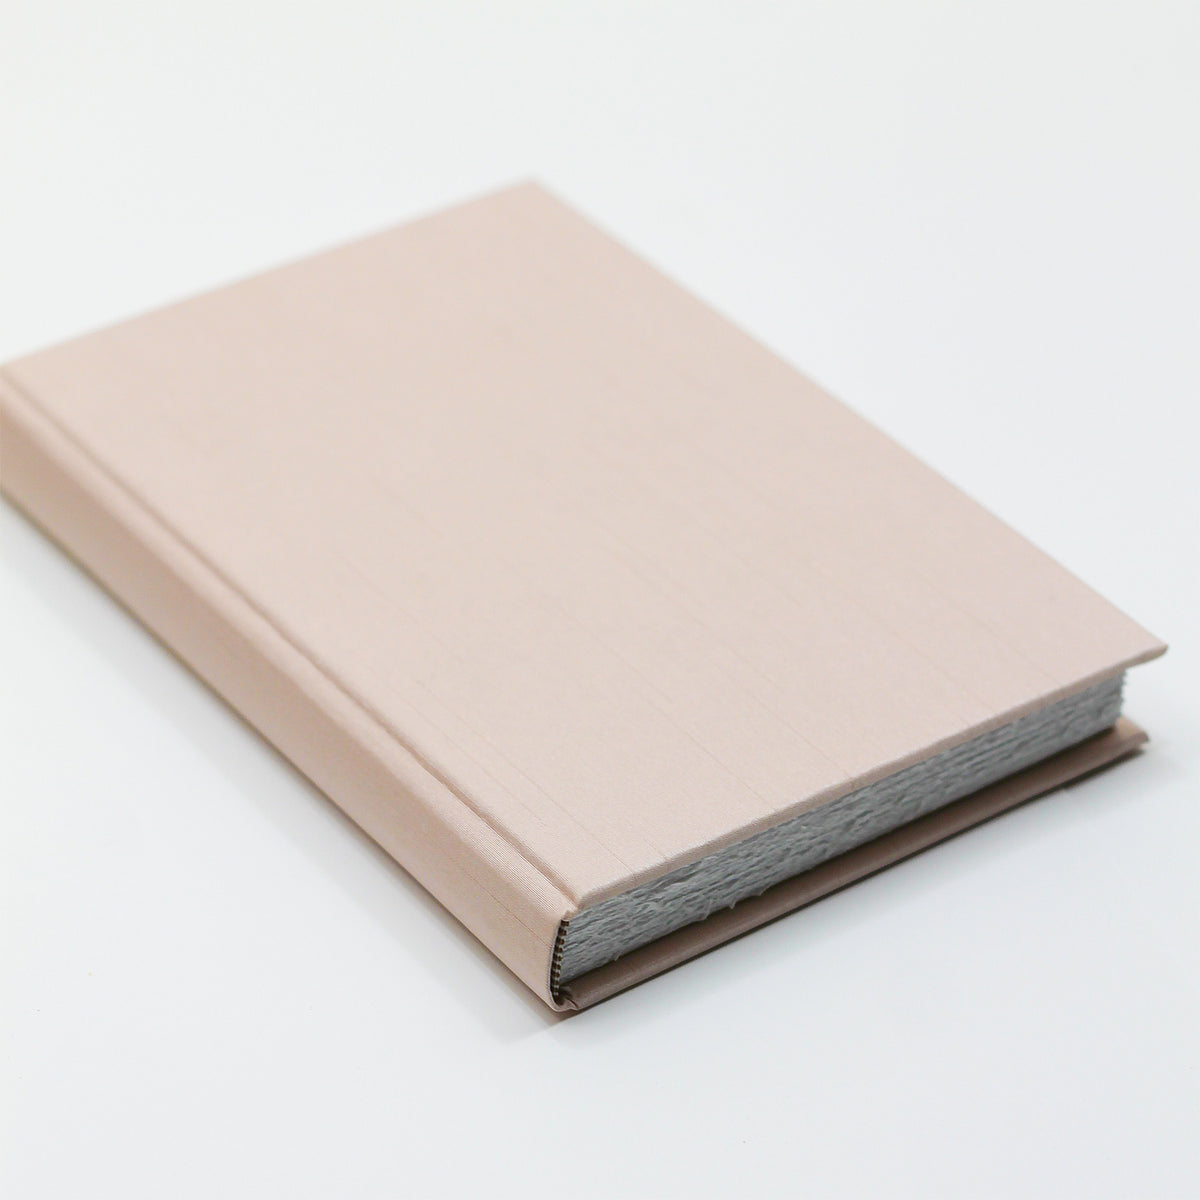 Medium 5.5x8.5 Blank Page Journal | Cover: Blush Pink Silk | Available Personalized